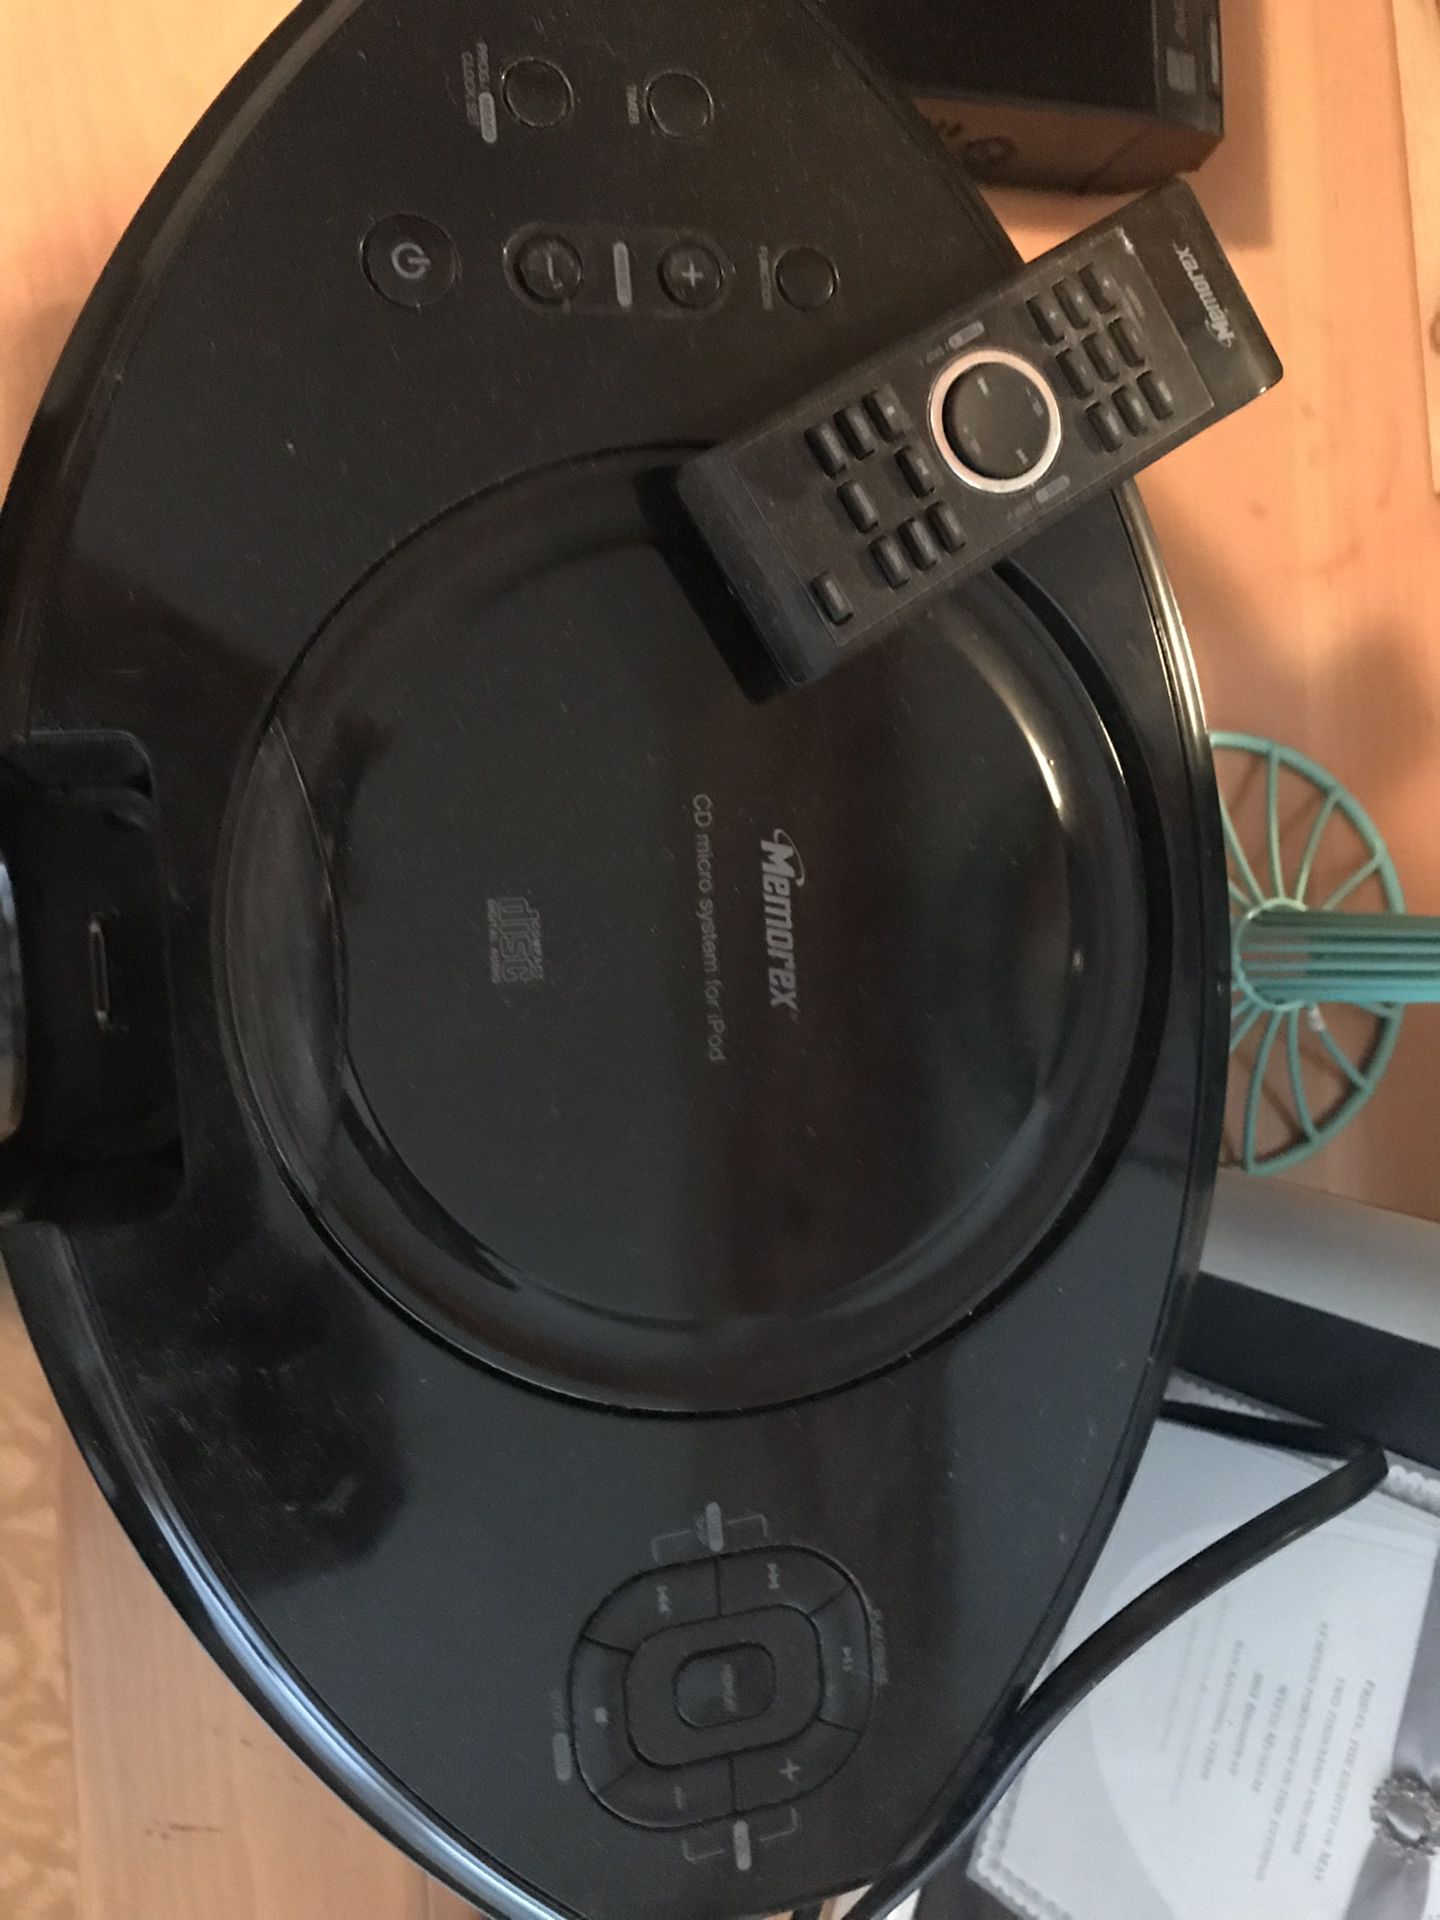 Memorex CD player and iPod player combo